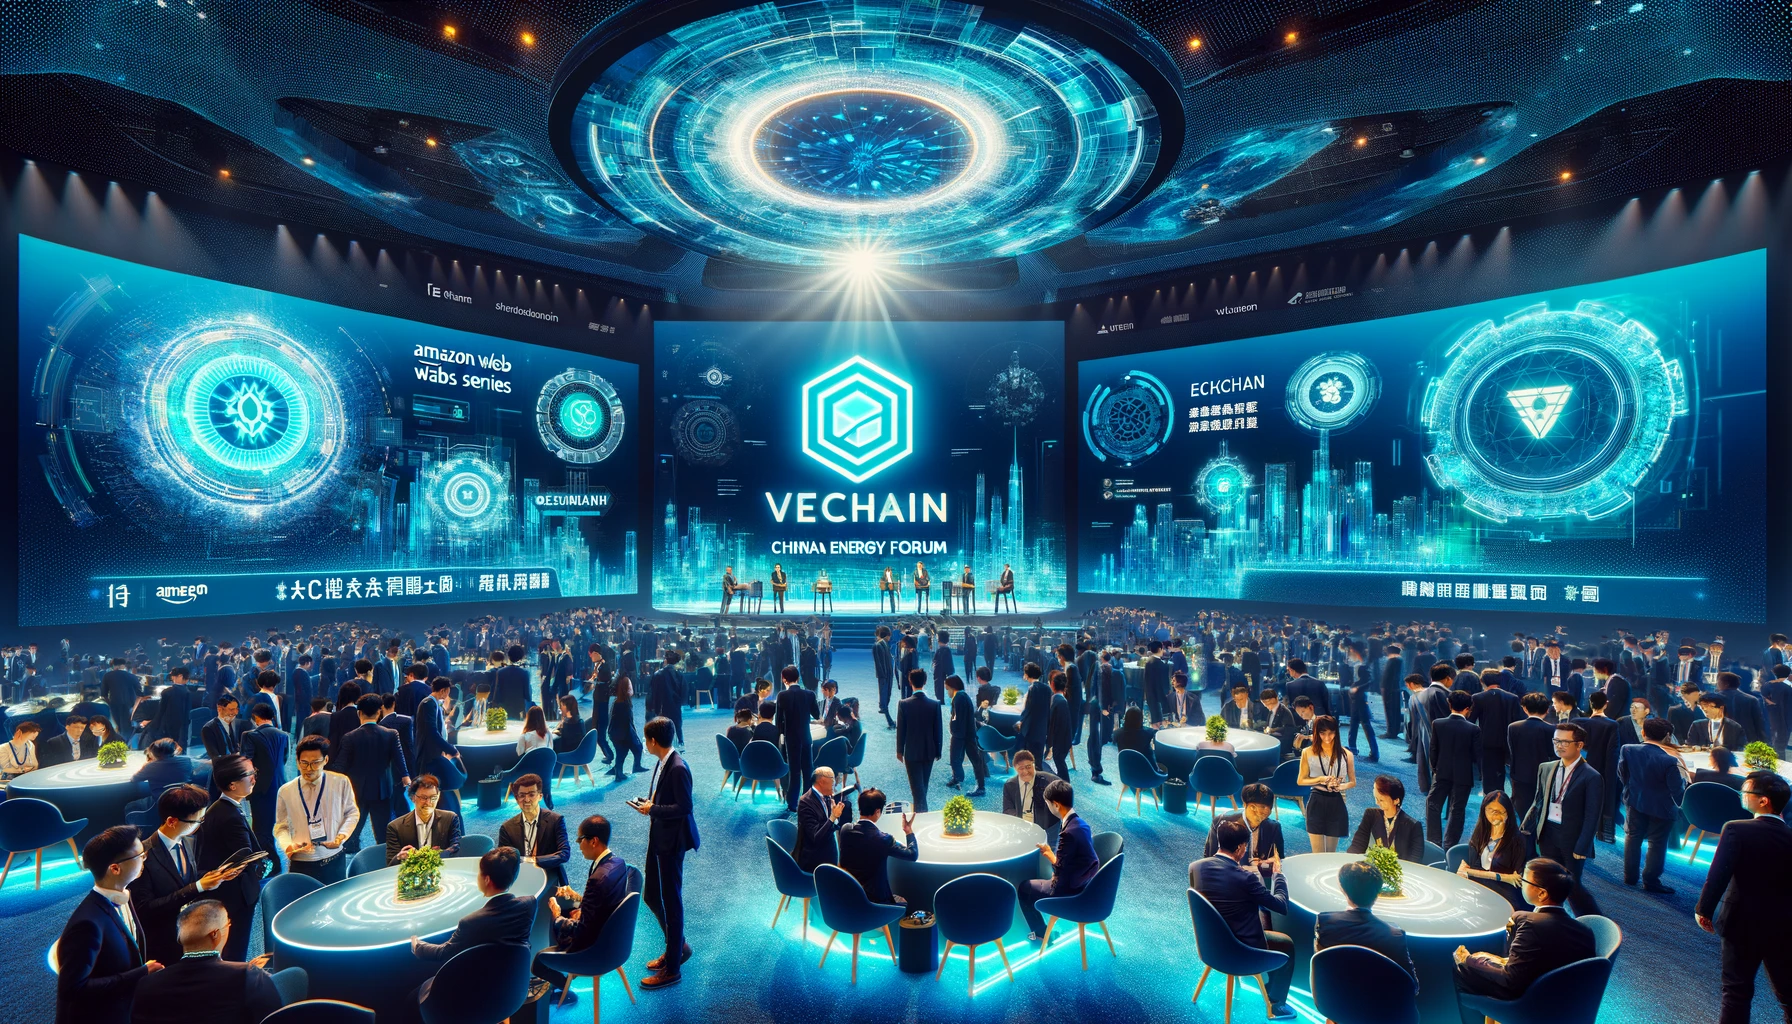 VeChain Shines at Amazon Web Services China Summit Energy Forum in Shanghai and Ready to Lead Sustainability Industry